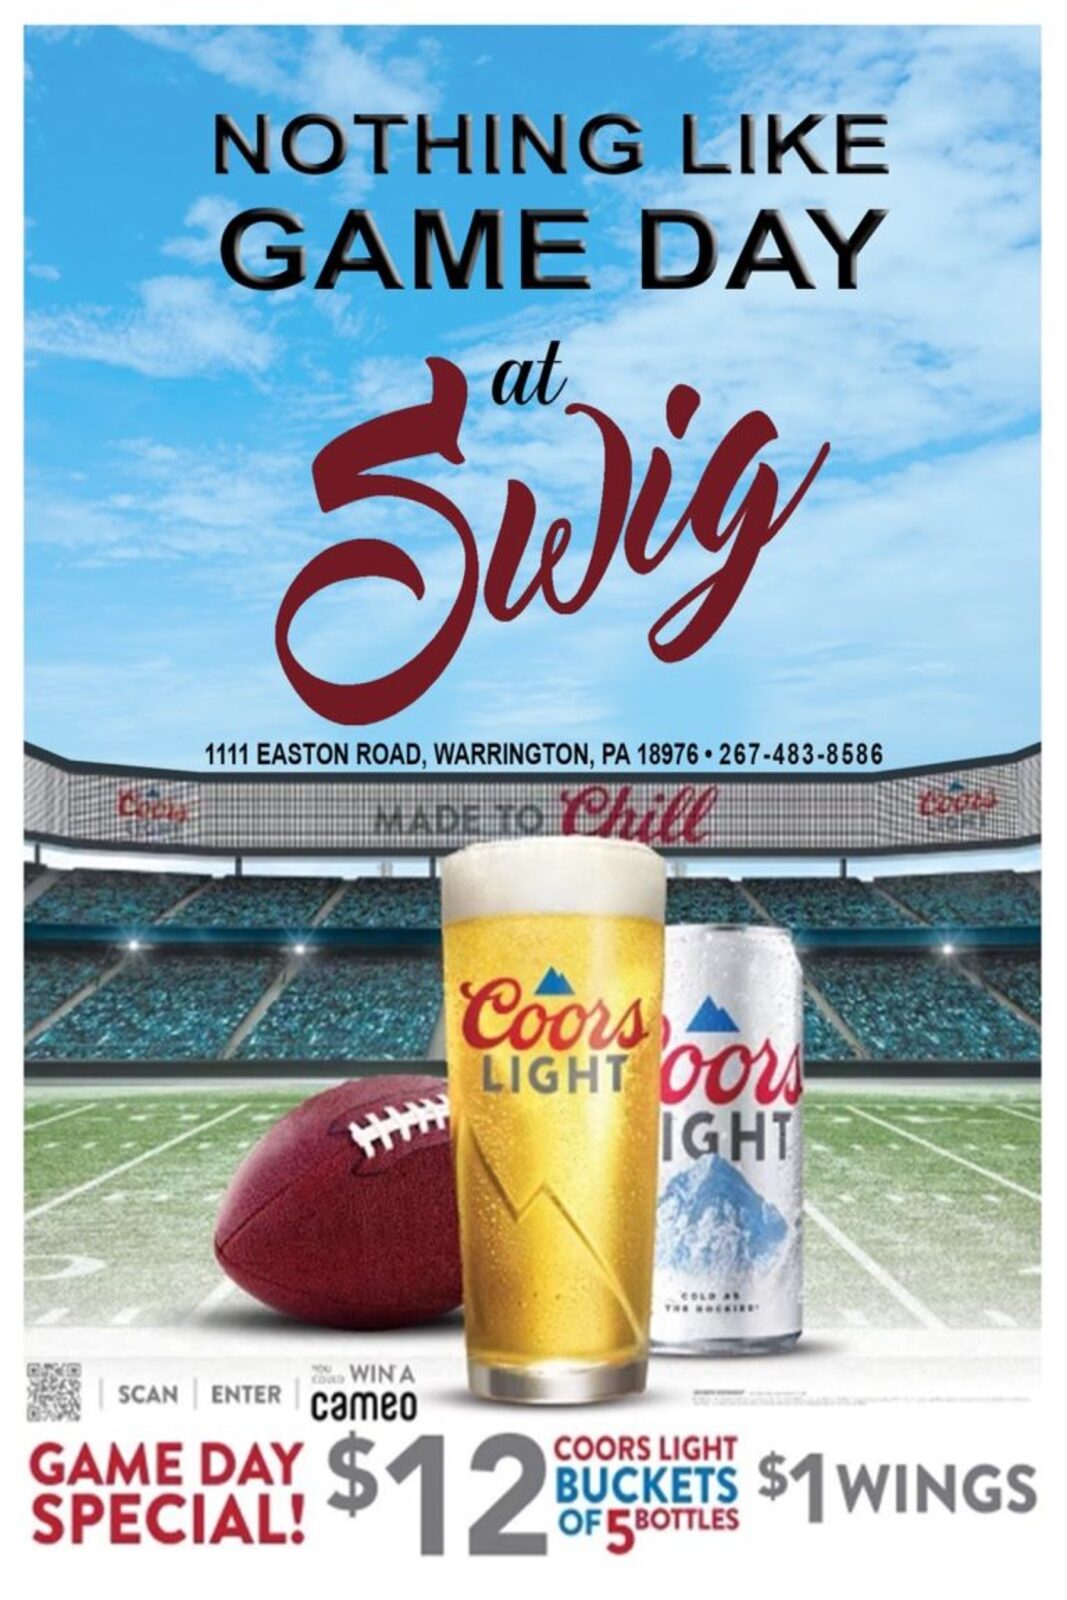 Nothing like game day at swig light.